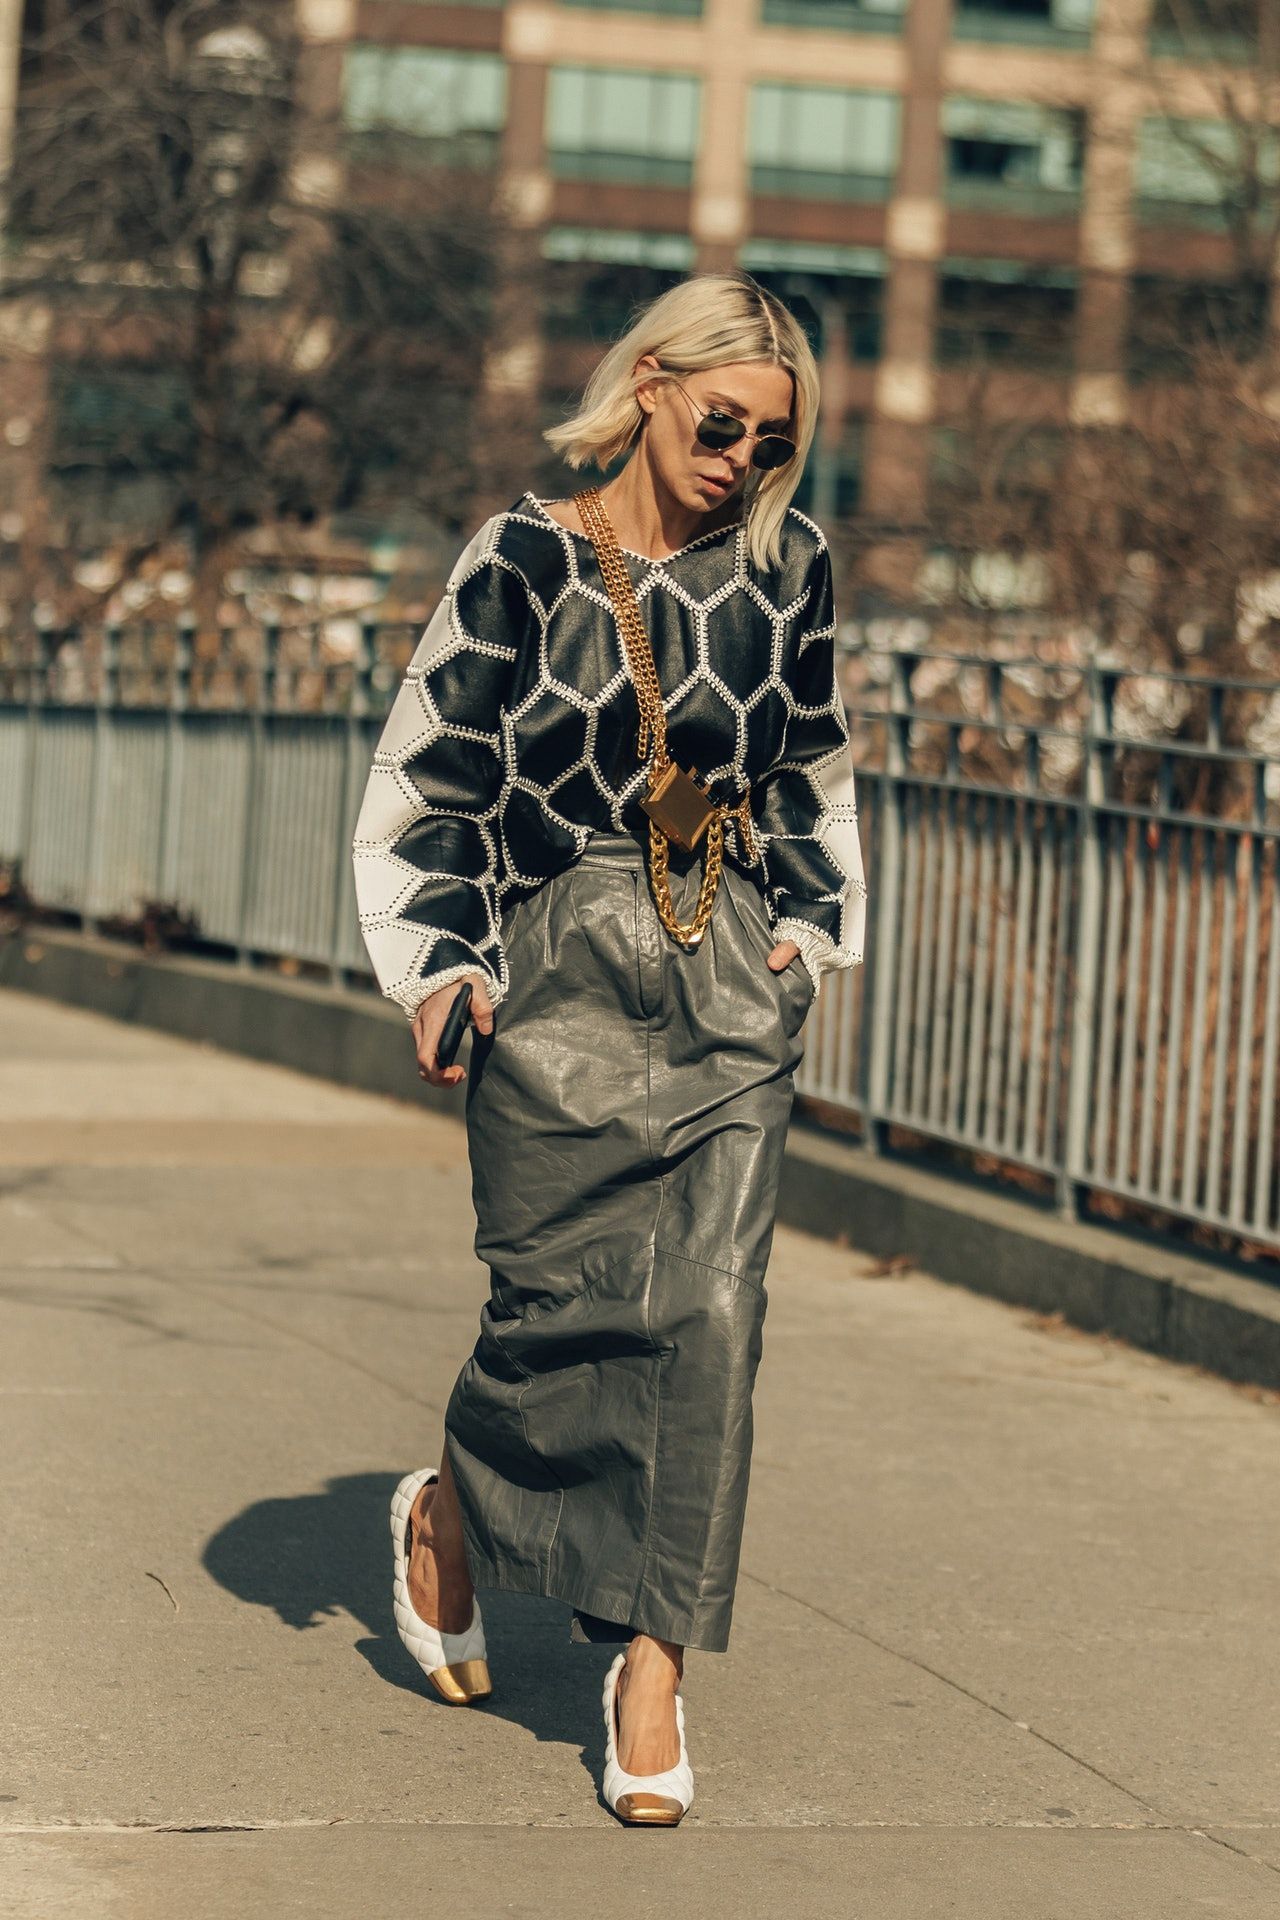 The Best Street Style From NYFW - The Best Street Style From NYFW -   18 style Street classy ideas